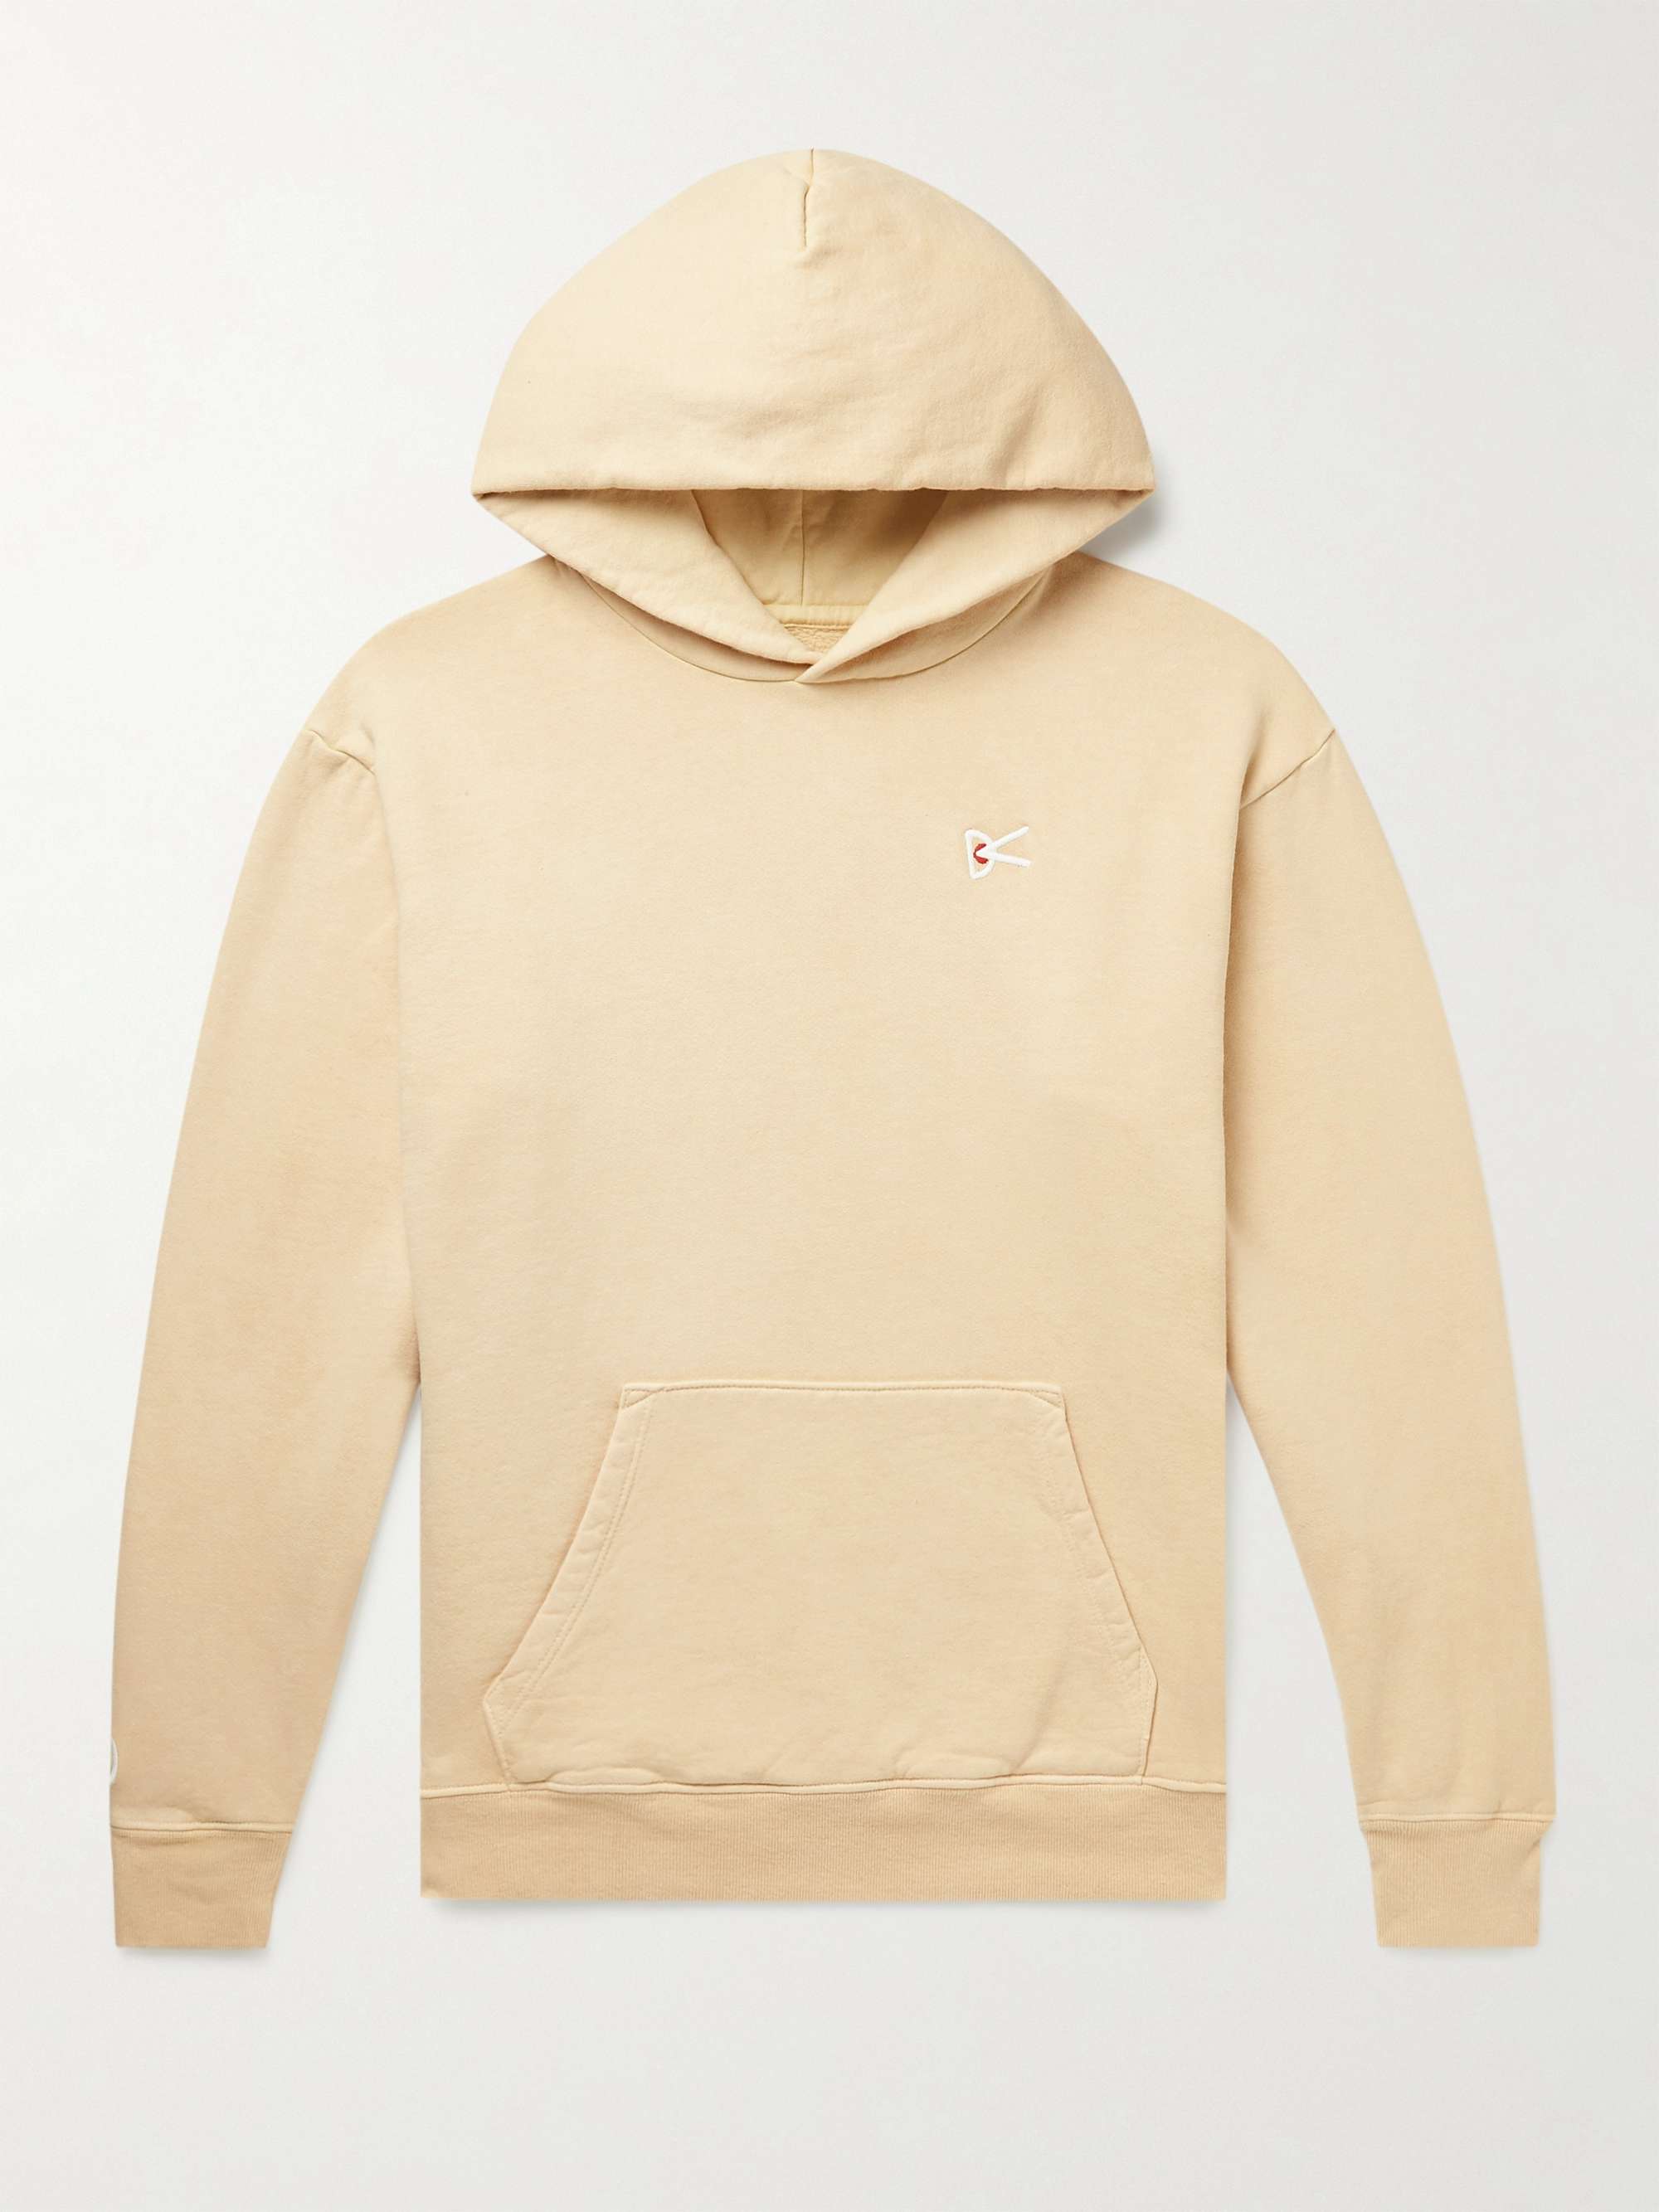 DISTRICT VISION + MR PORTER Health In Mind Mudita Recycled Cotton-Blend Jersey Hoodie